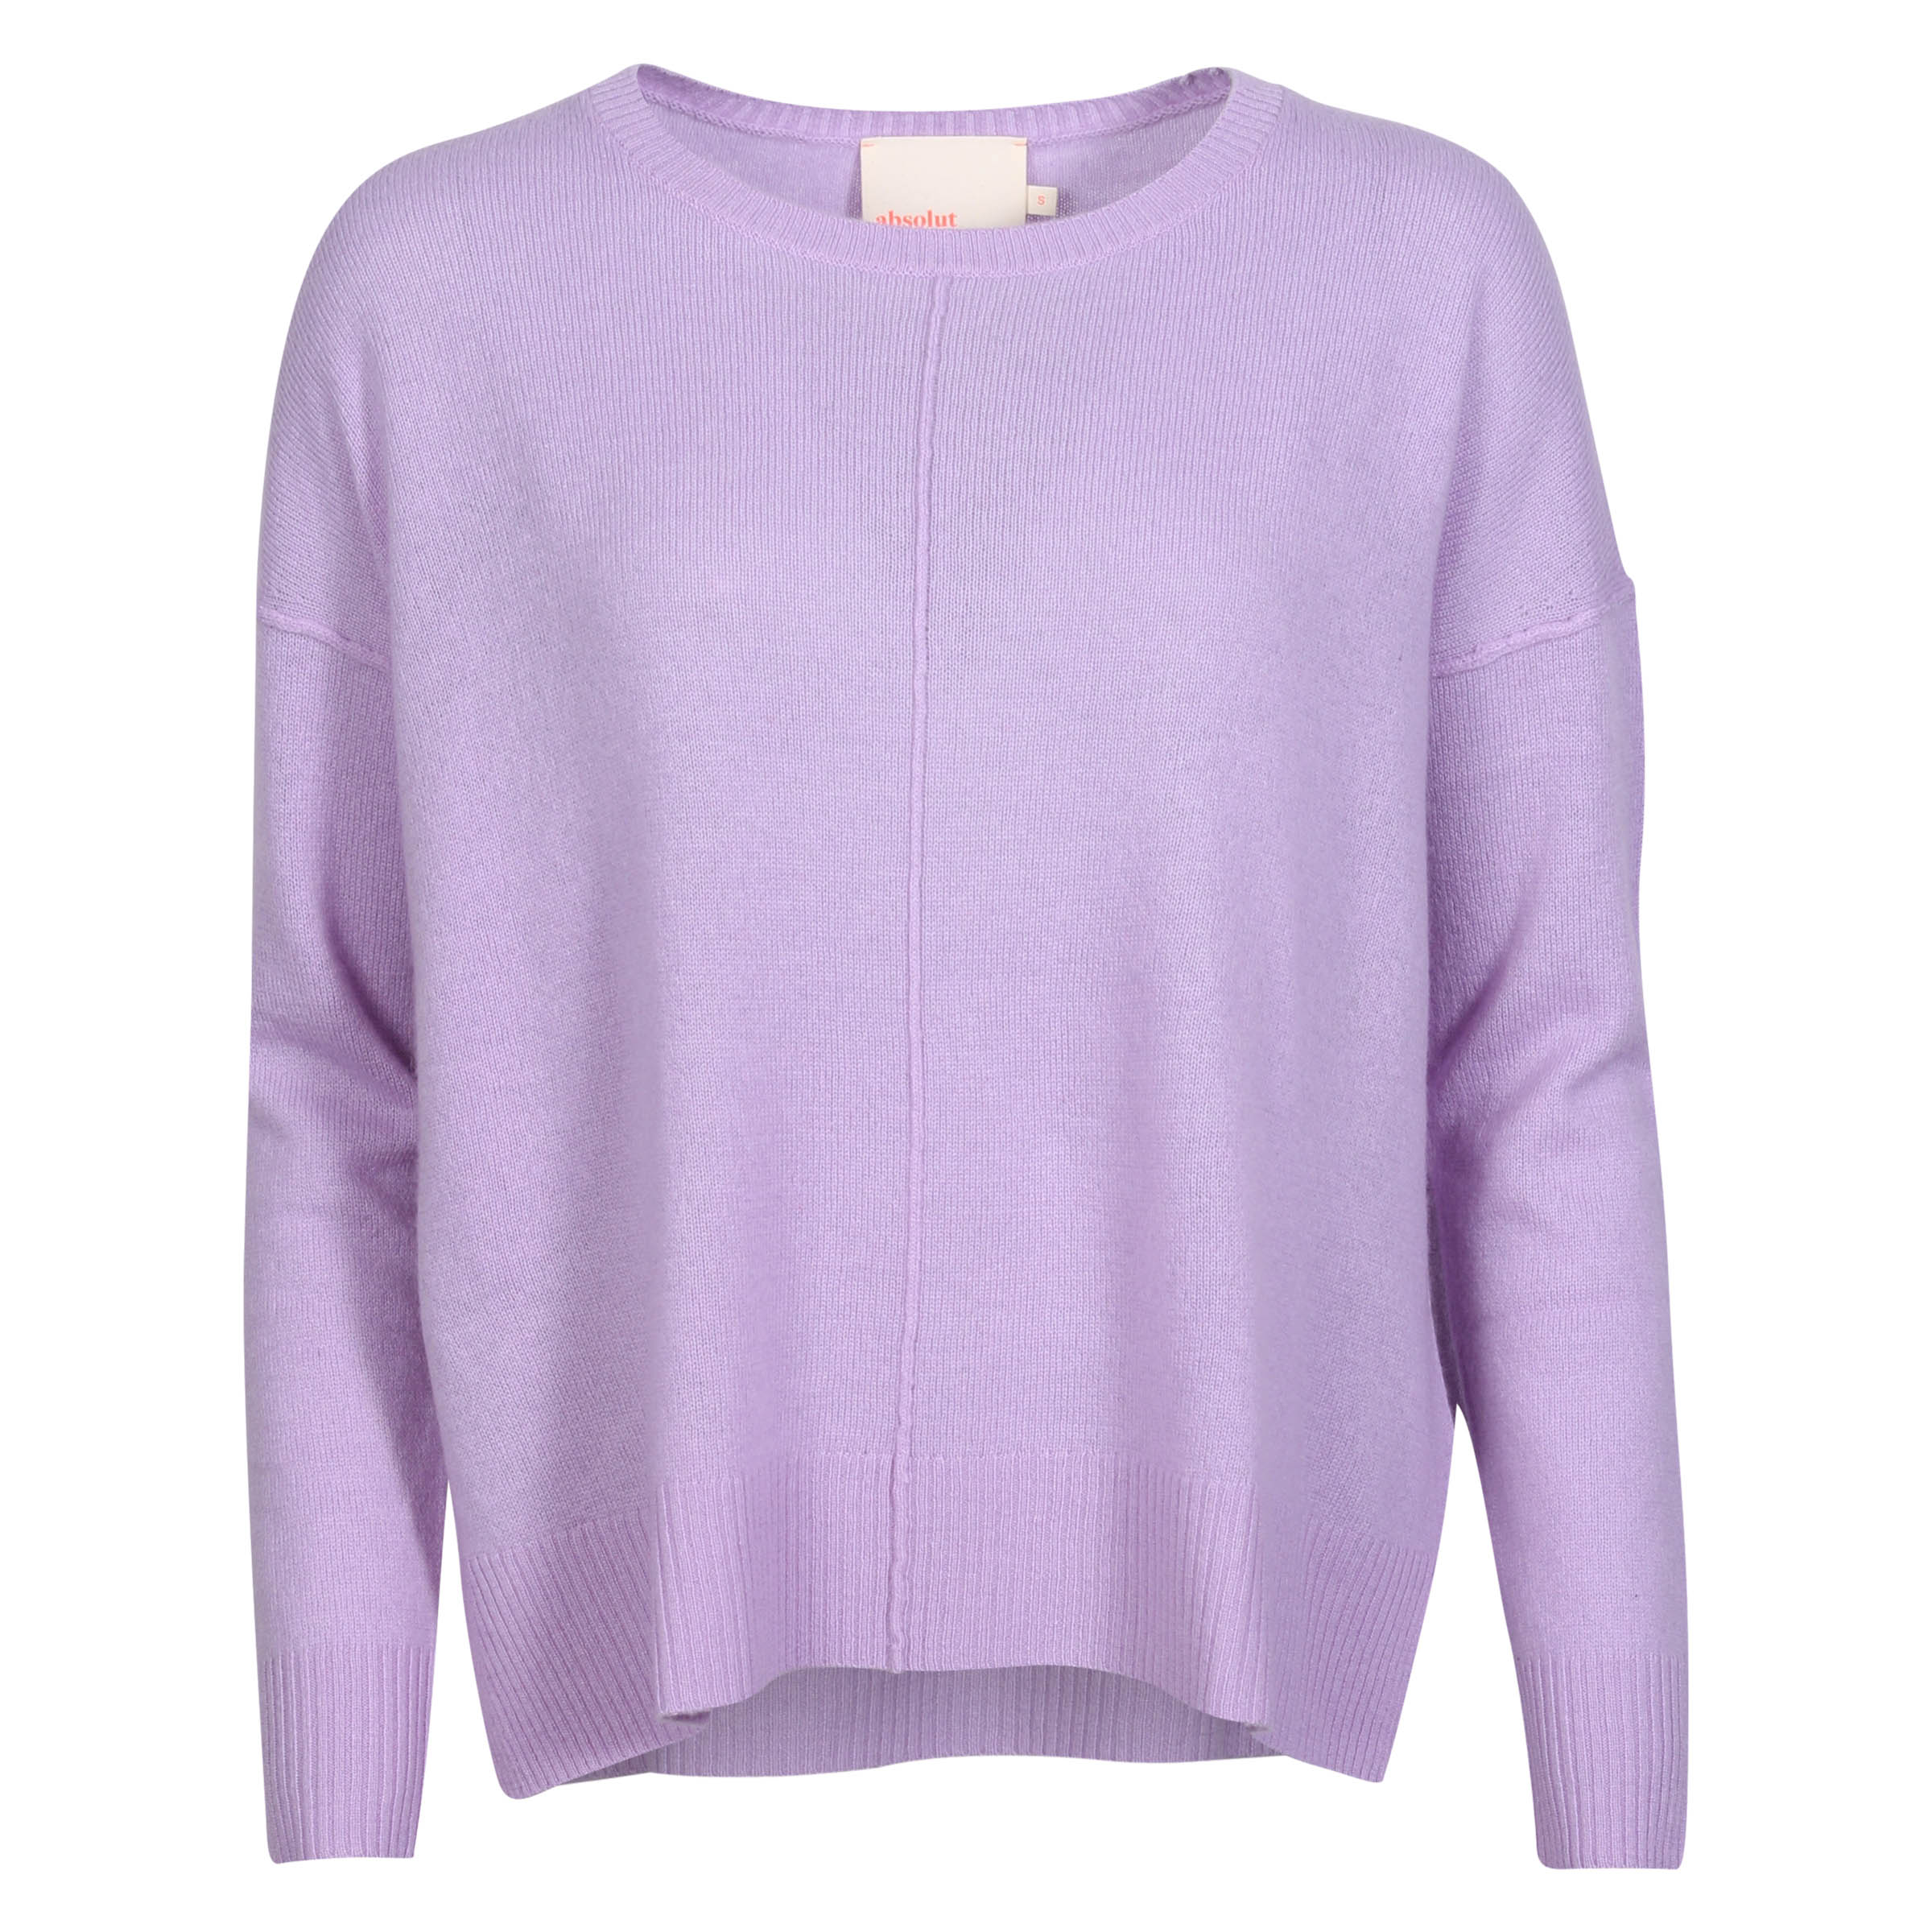 Absolut Cashmere Oversized Sweater Kenza Lilac XS